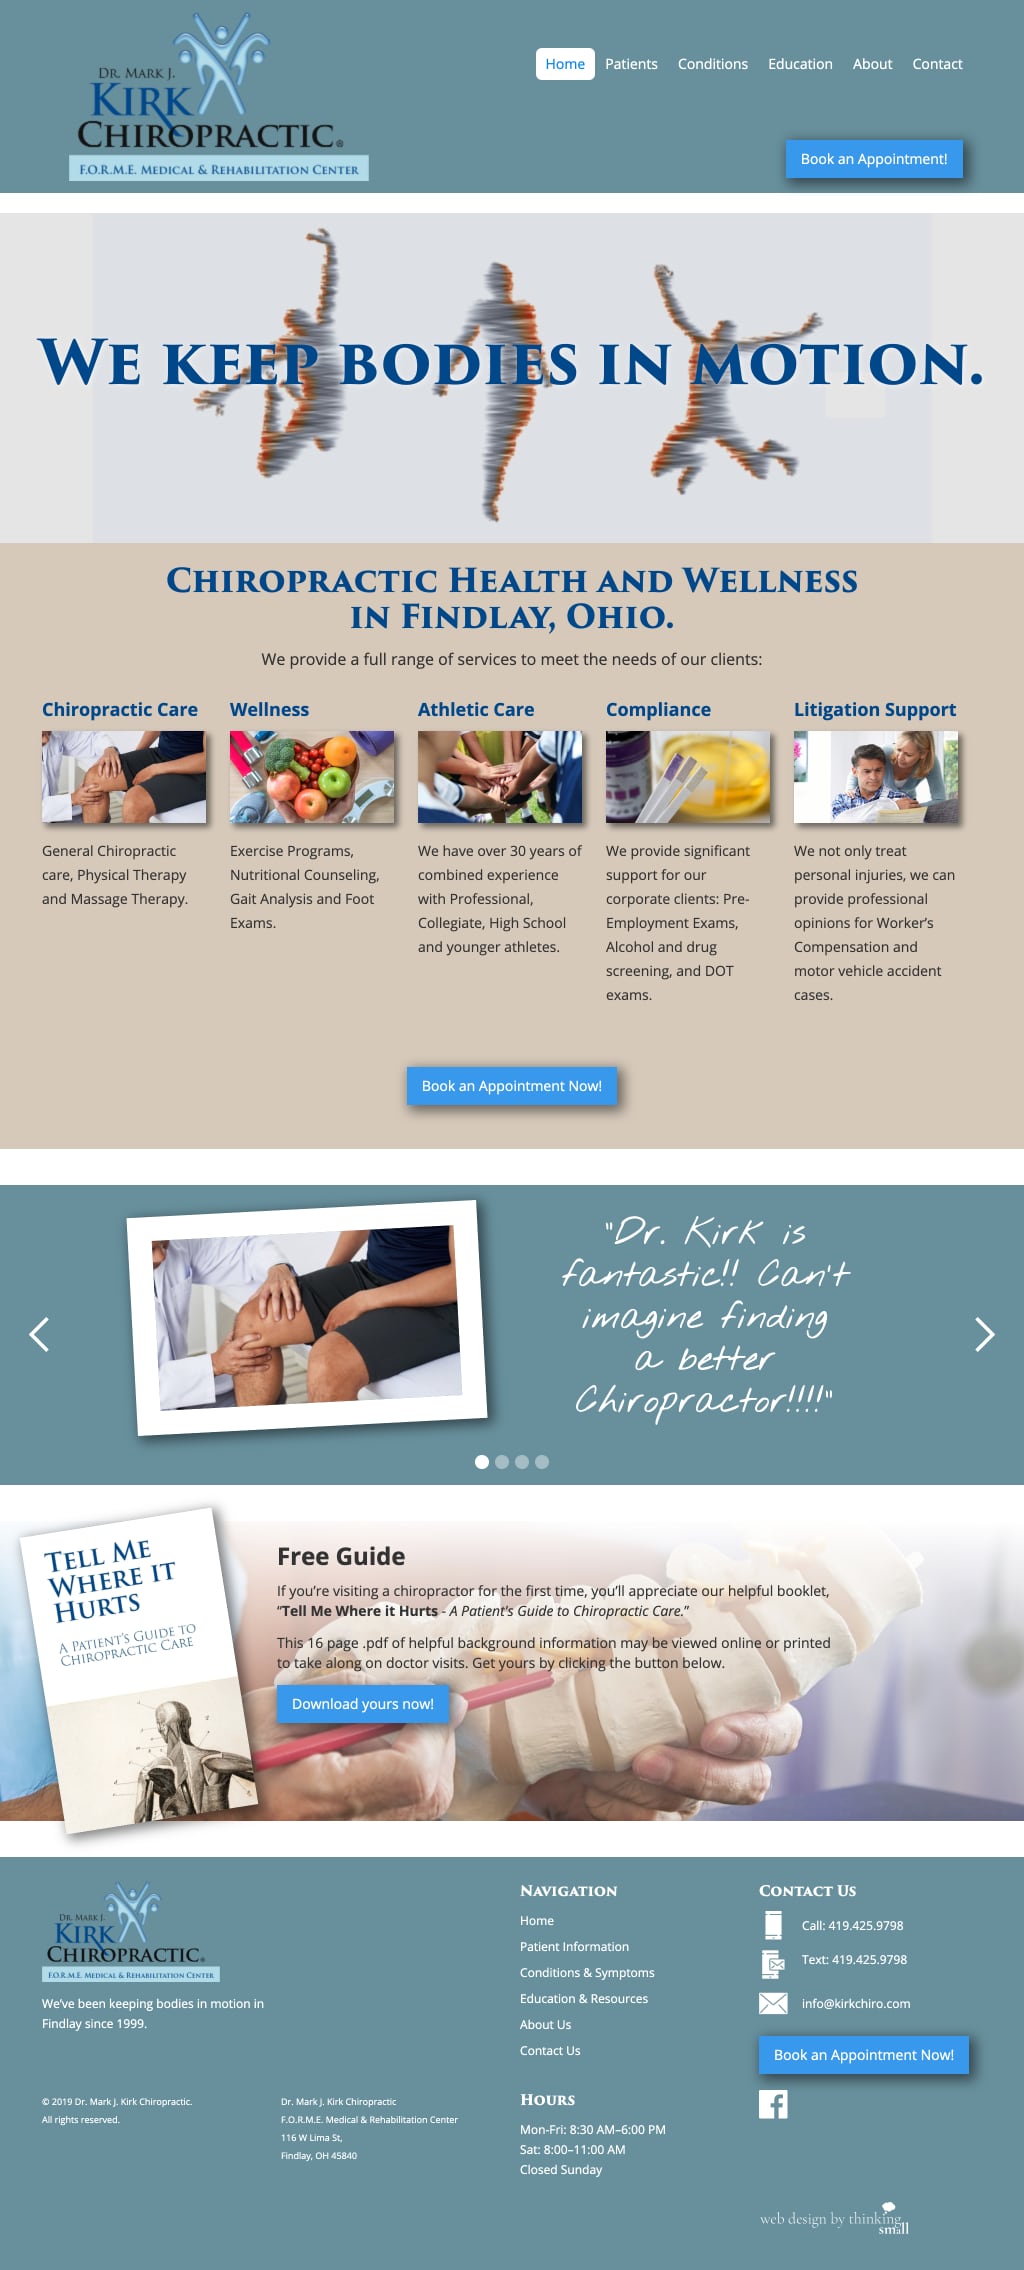 Kirk Chiropractic Web Page